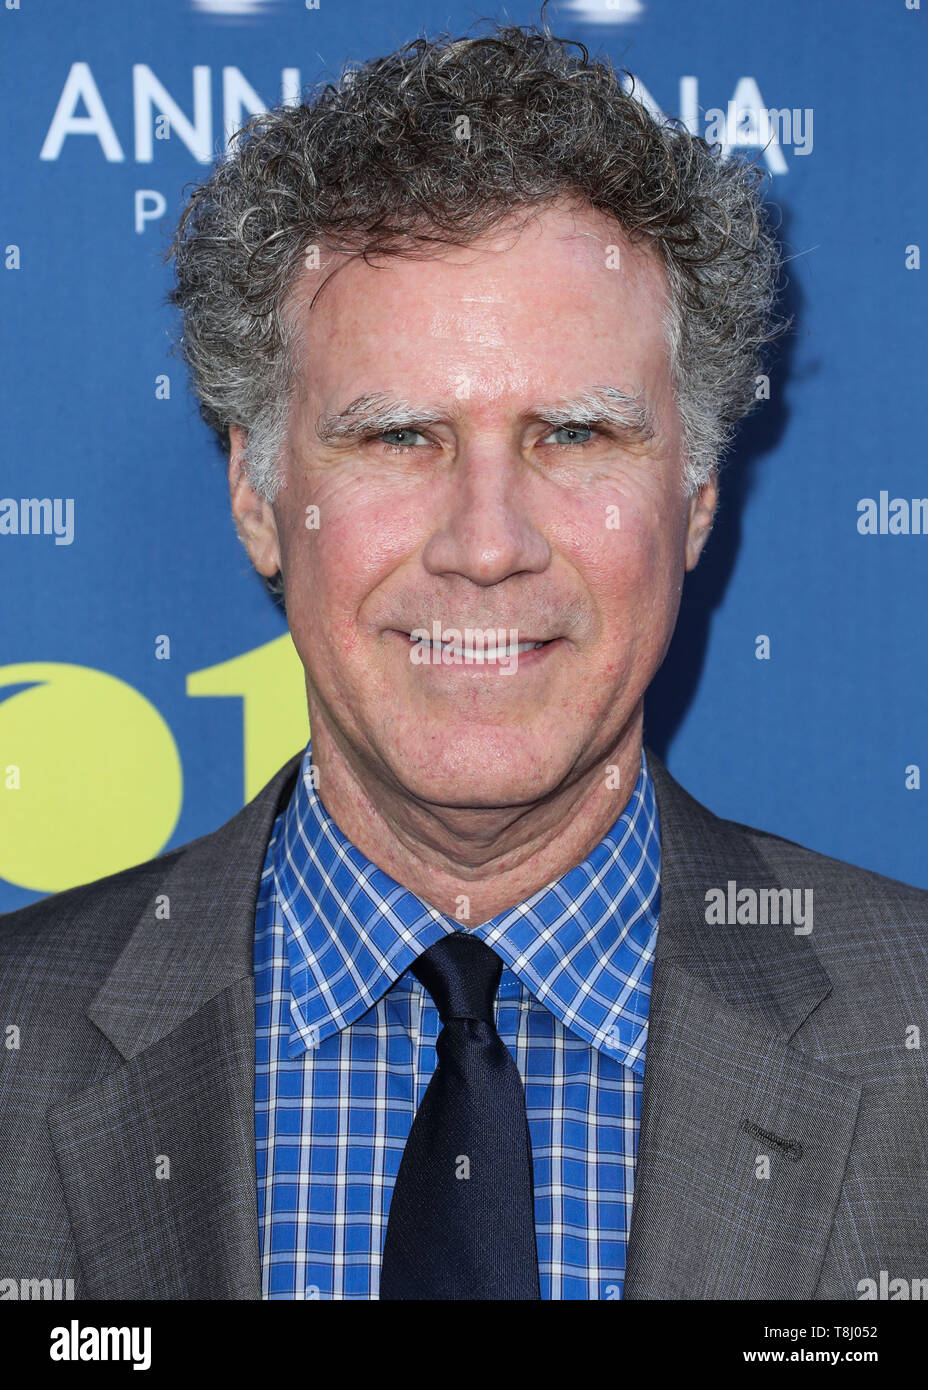 Actor Will Ferrell arrives at the Los Angeles Special Screening Of Annapurna Pictures' 'Booksmart' held at the Ace Hotel on May 13, 2019 in Los Angeles, California, United States. (Photo by Xavier Collin/Image Press Agency) Stock Photo